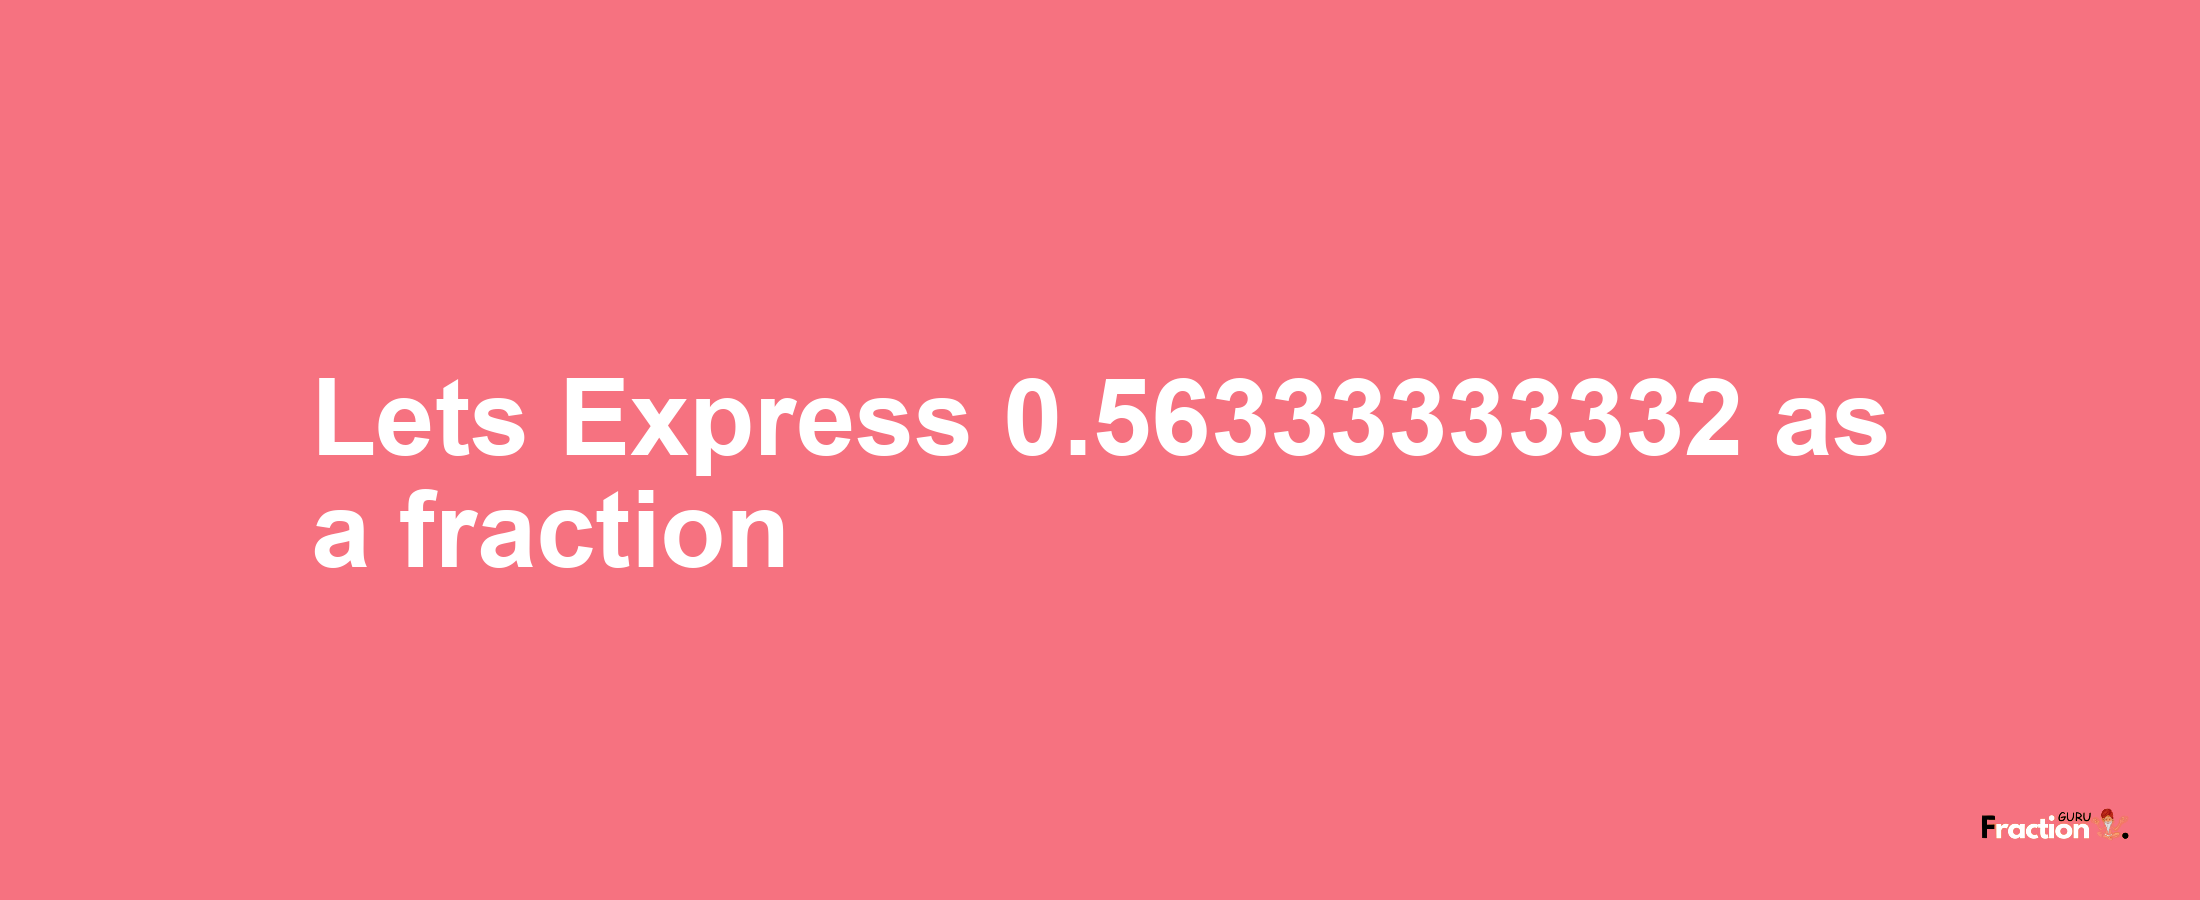 Lets Express 0.56333333332 as afraction